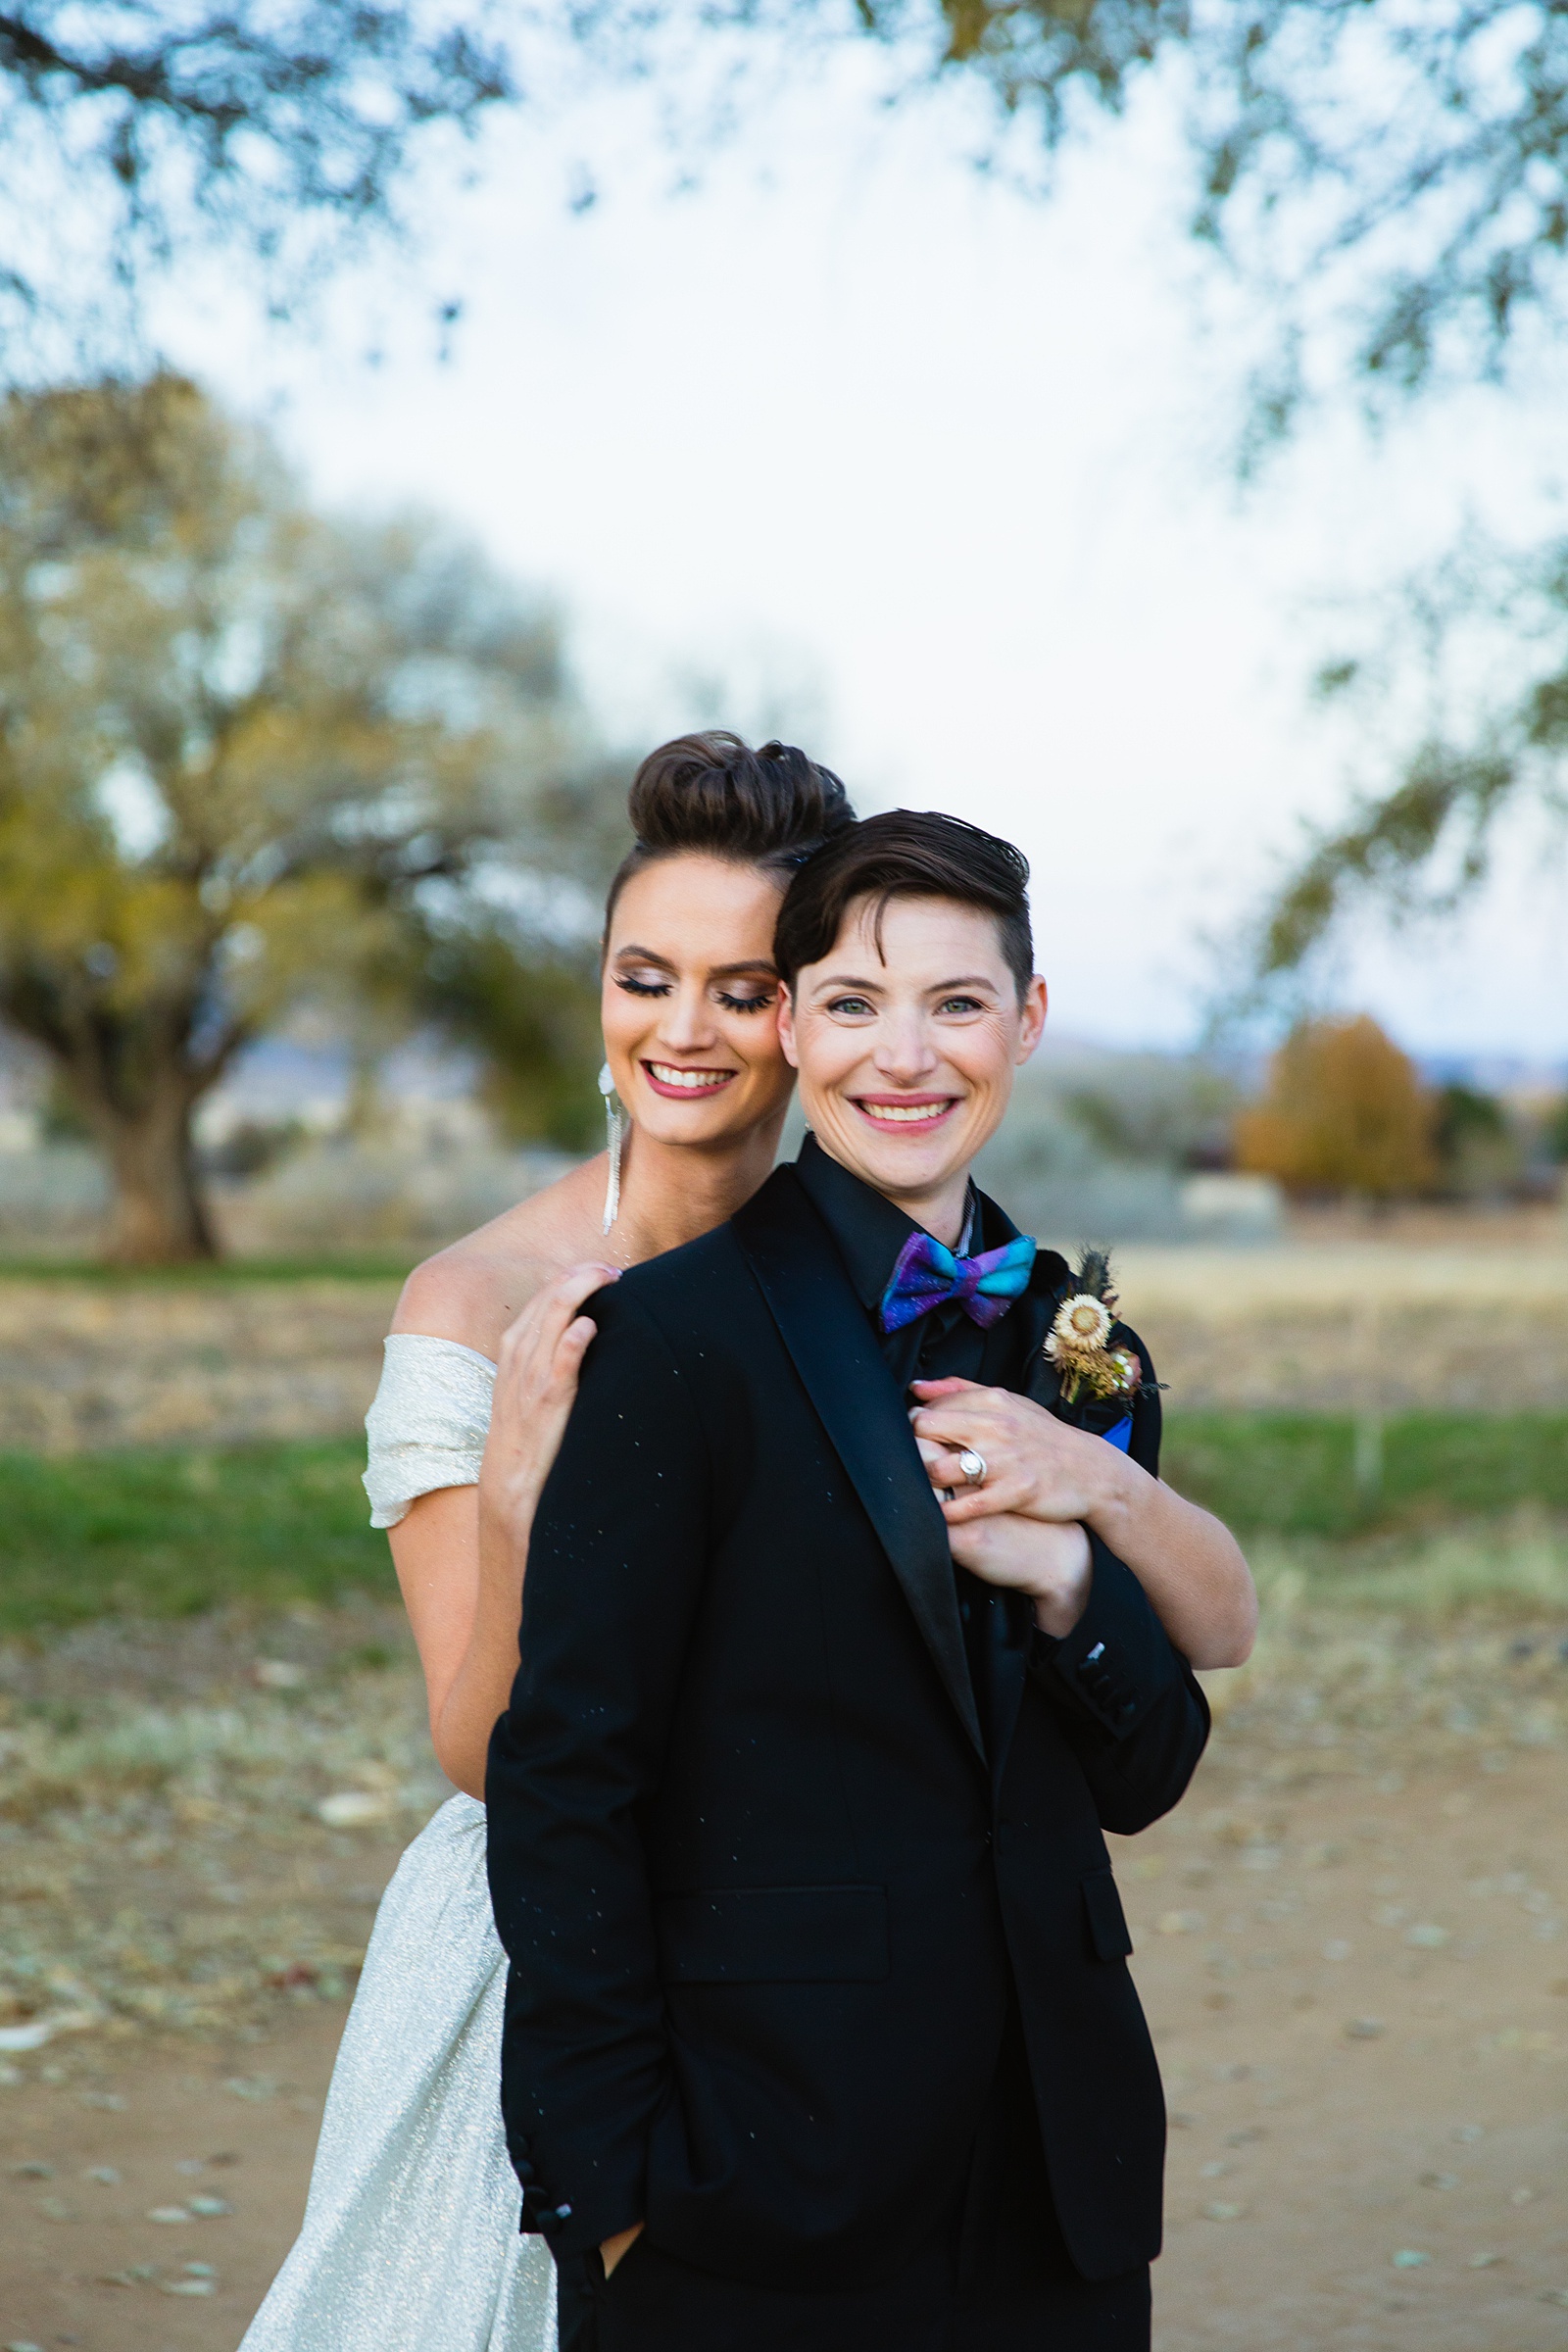 Same sex couple share an intimate moment during their Mortimer Farms wedding by Prescott wedding photographer PMA Photography.